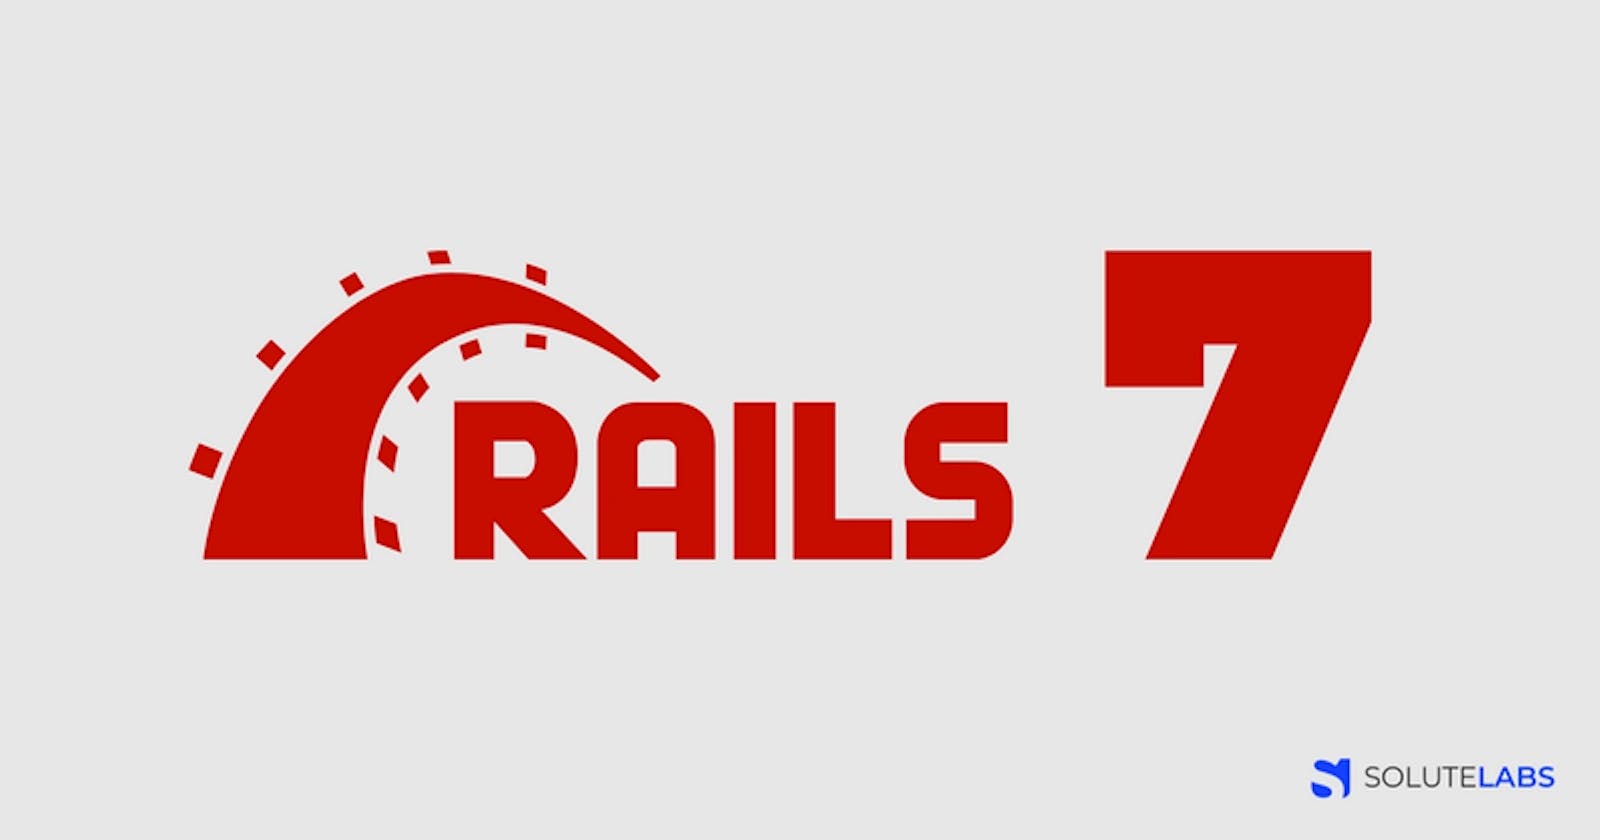 What’s new with Ruby on Rails 7